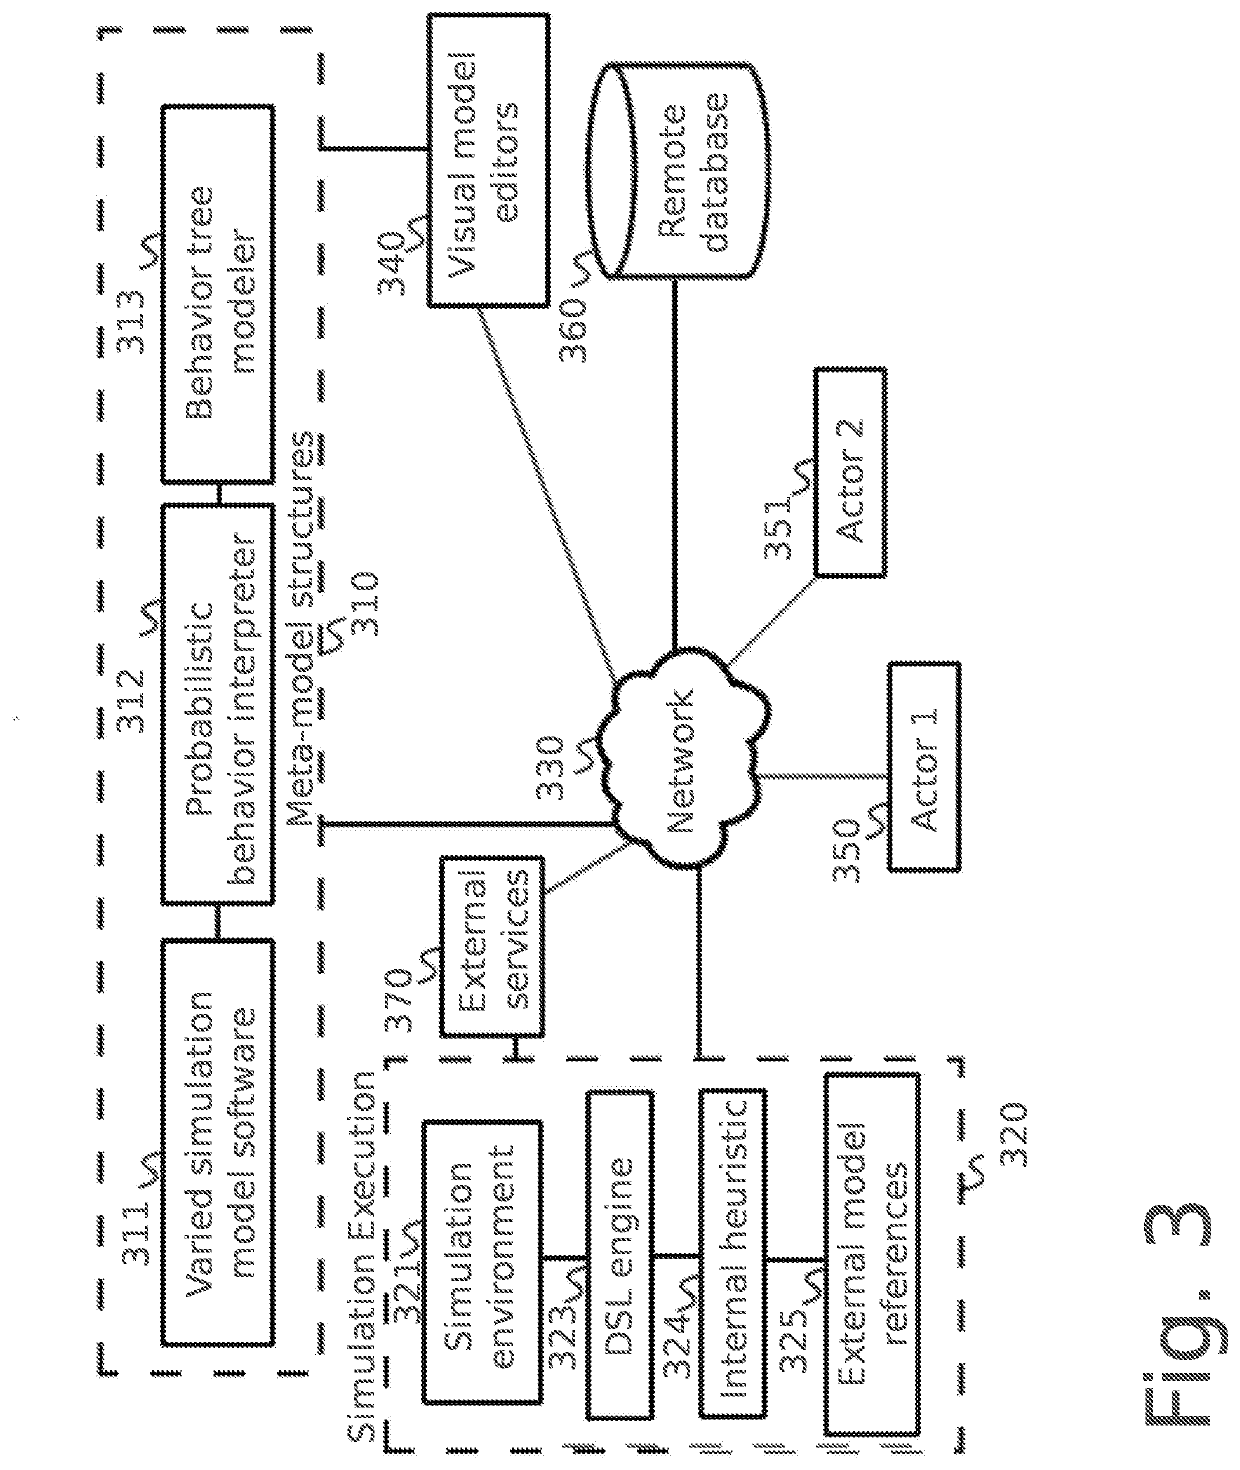 System and method for creating domain specific languages for digital environment simulations